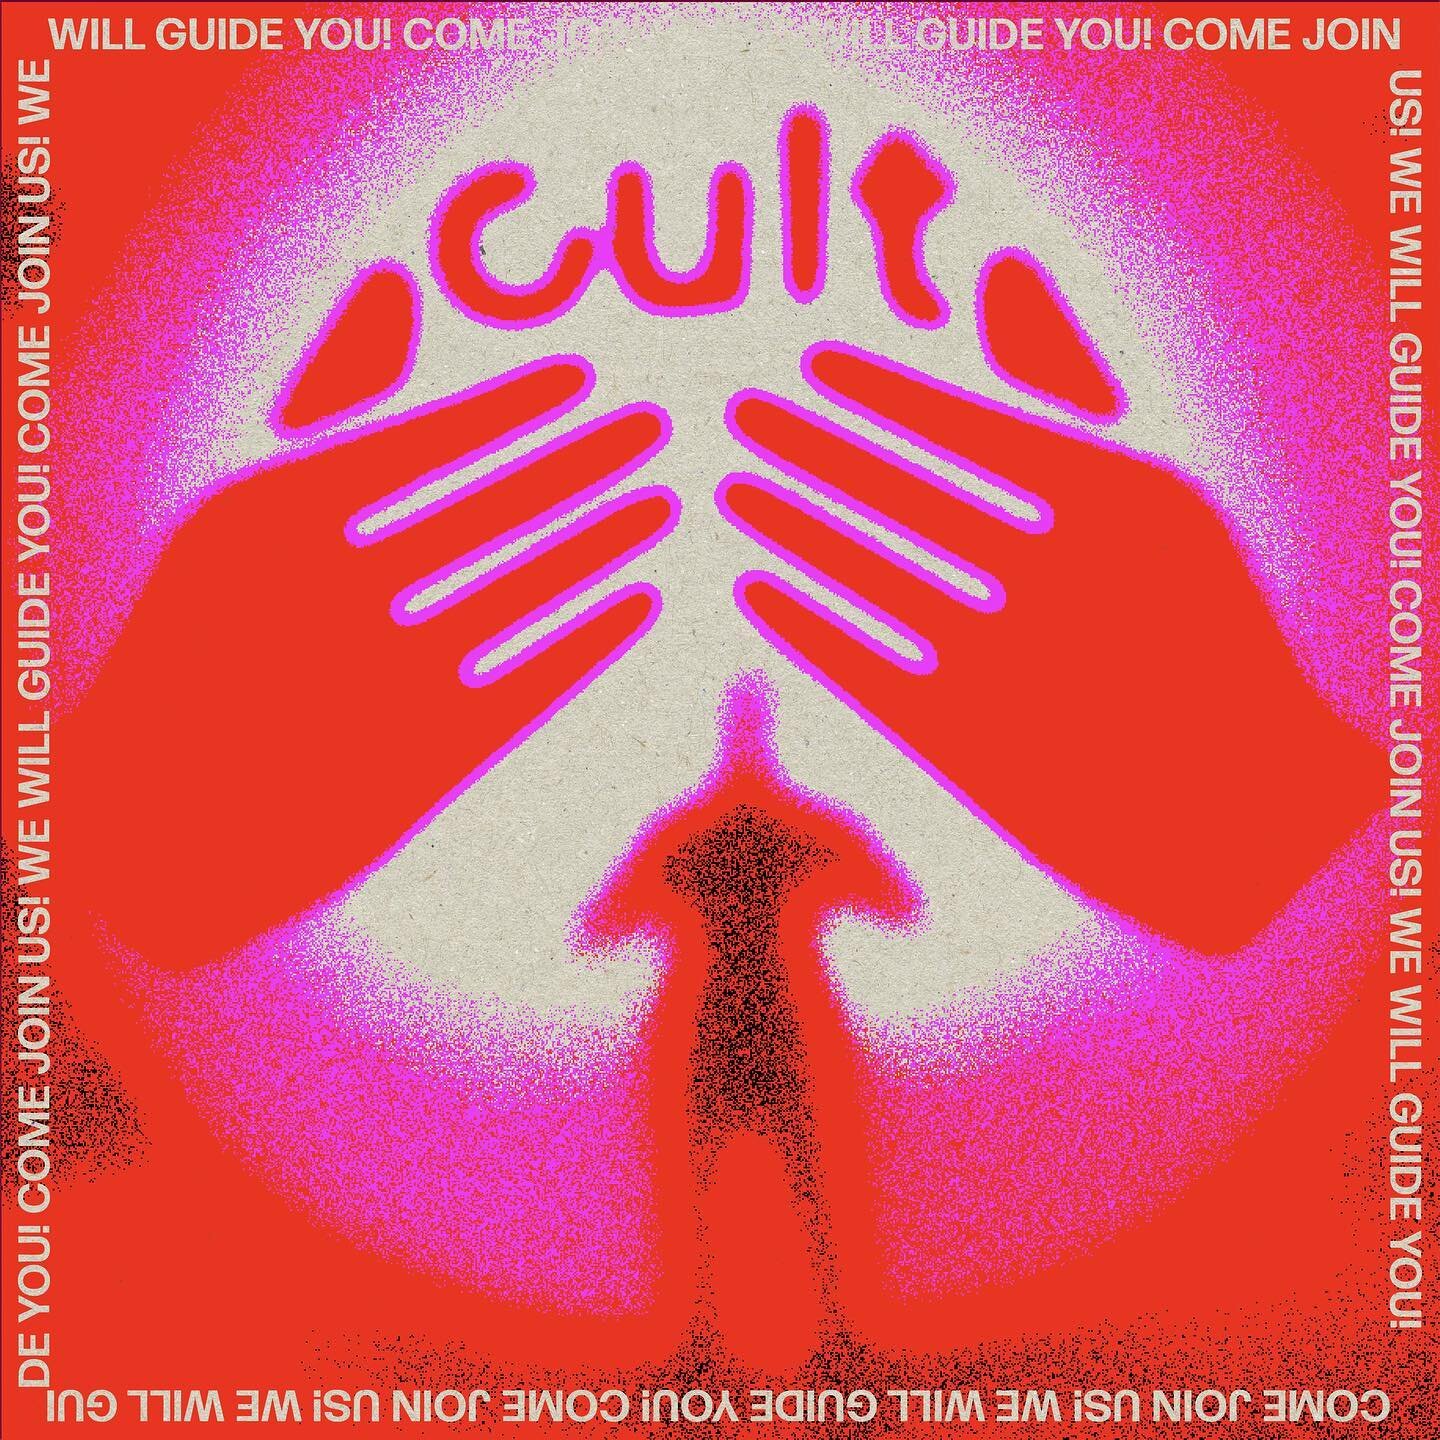 Hi 🛐 I branded a fake cult named cult for no reason 💗 I hope you like it and will join 🫡 special thanks to @craiyonai for helping provide imagery